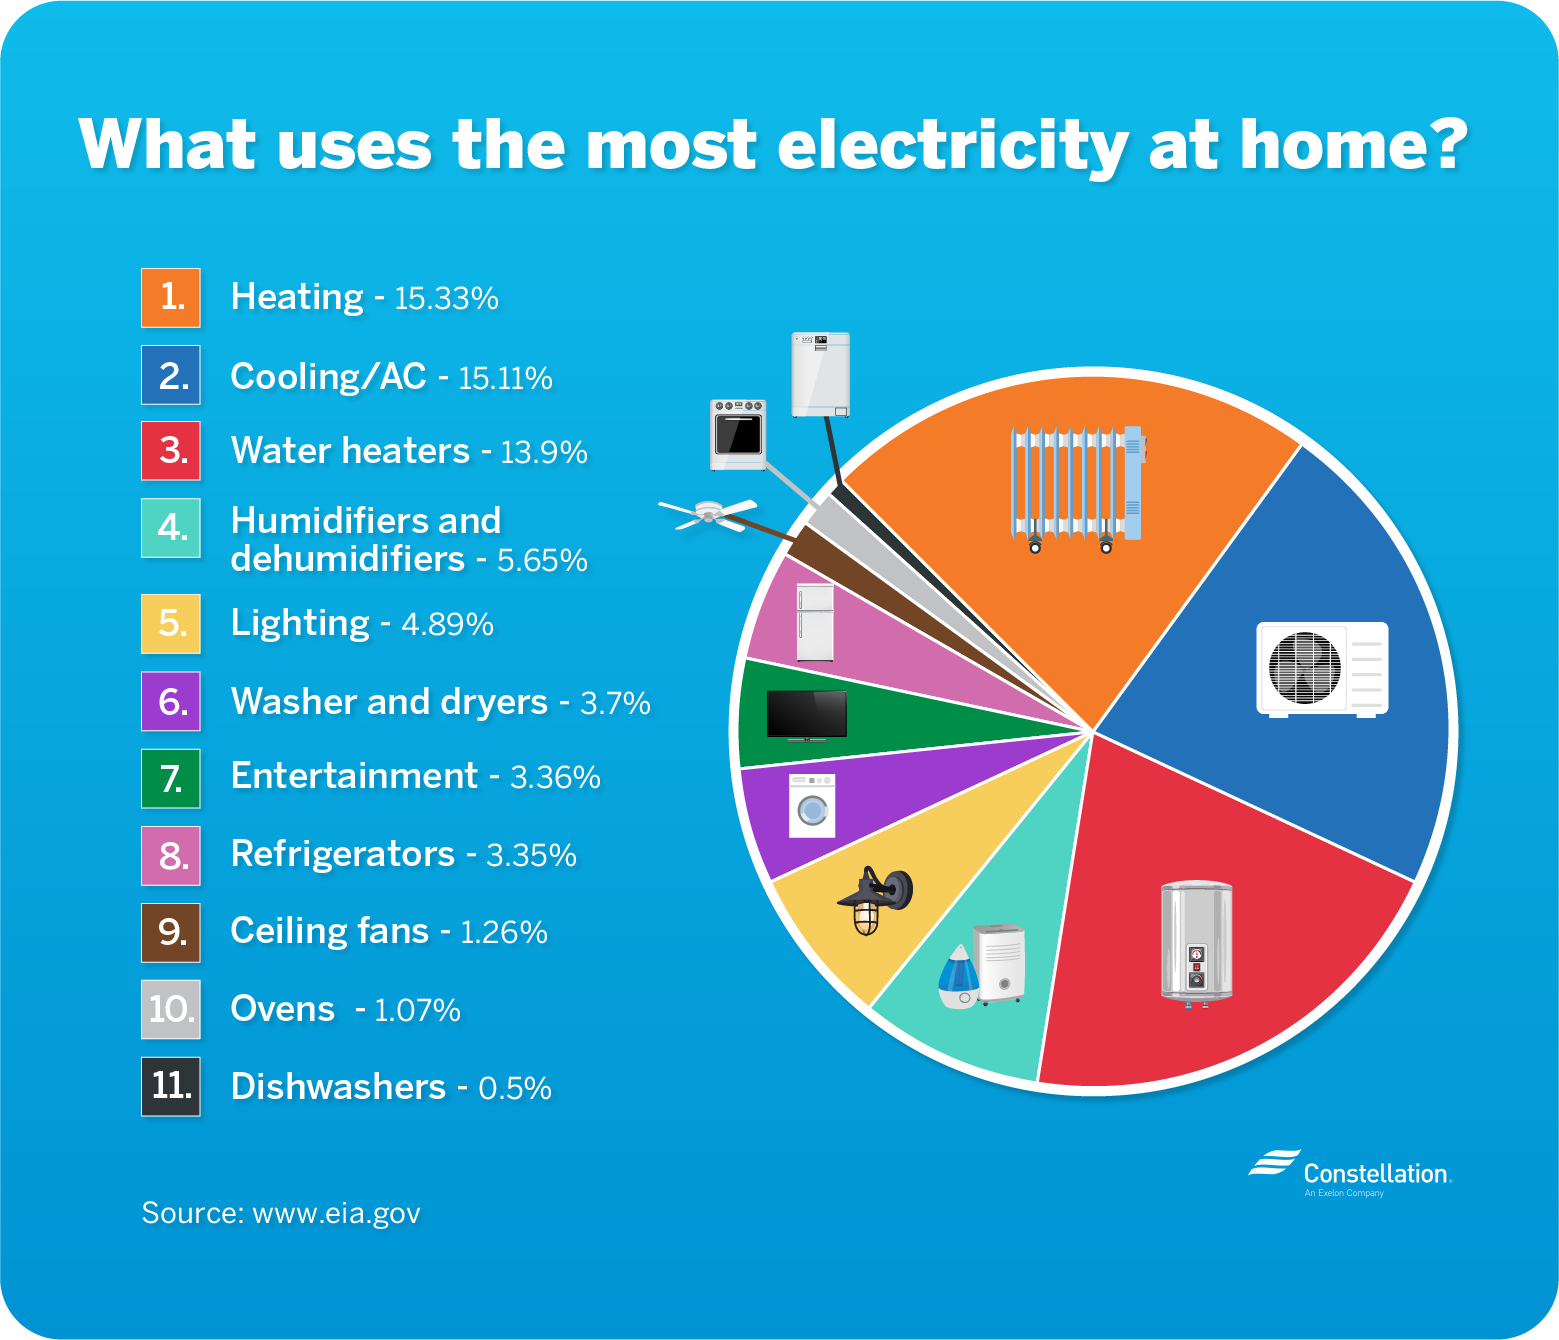 What uses the most electricity at home?